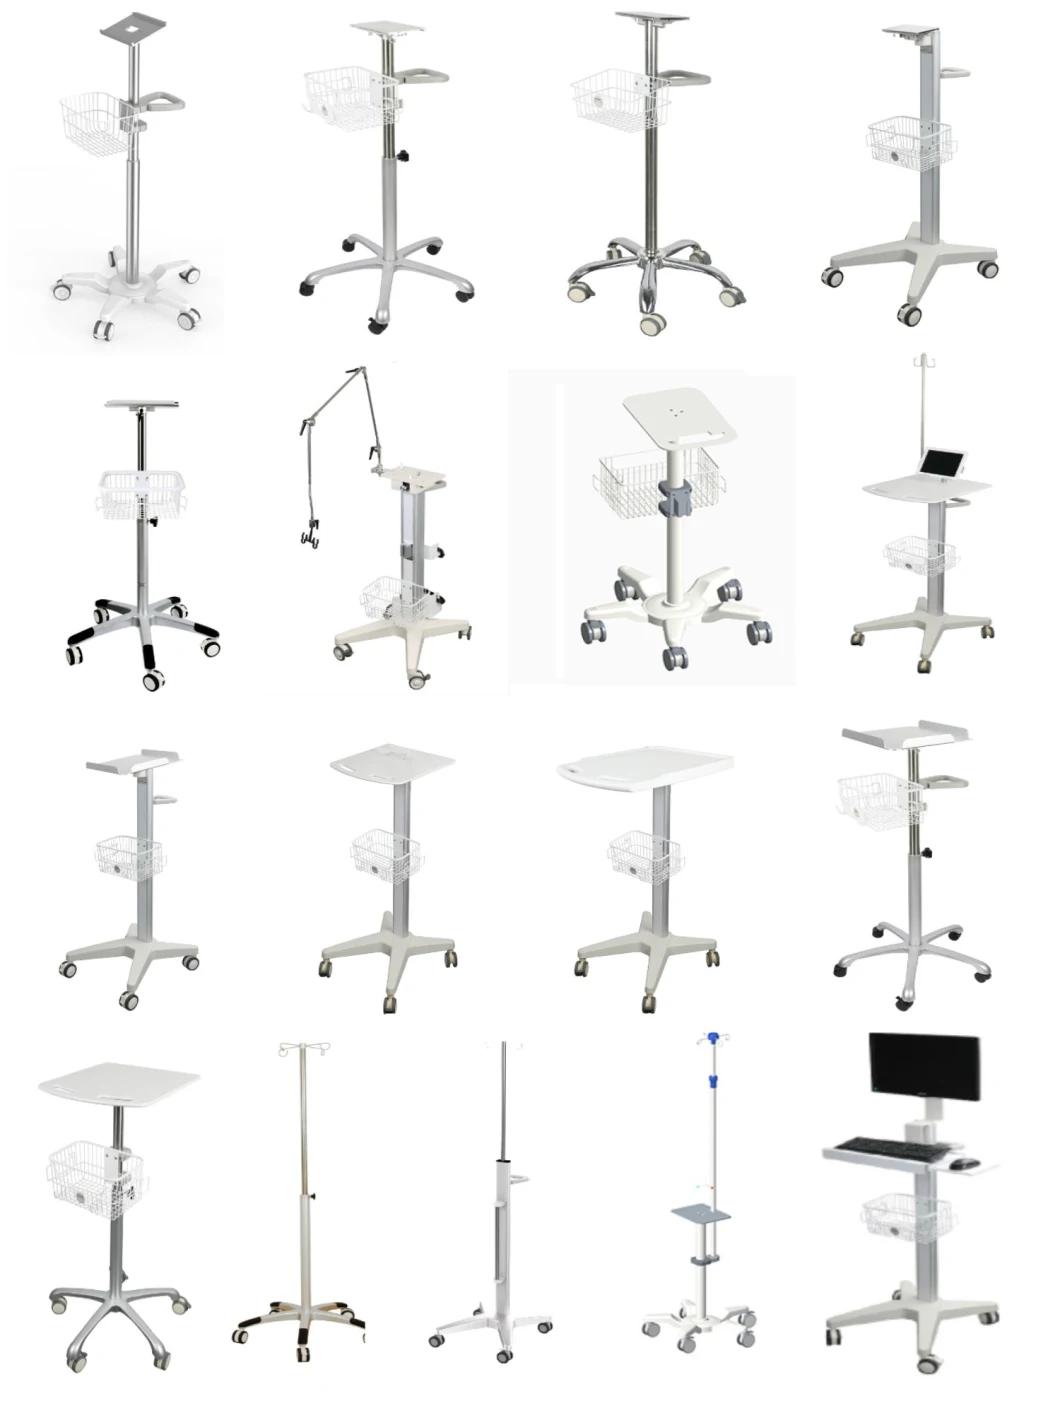 Stainless Steel Hospital Medical Trolley Cart Hospital Cart Syringe Infusion Pump Trolley